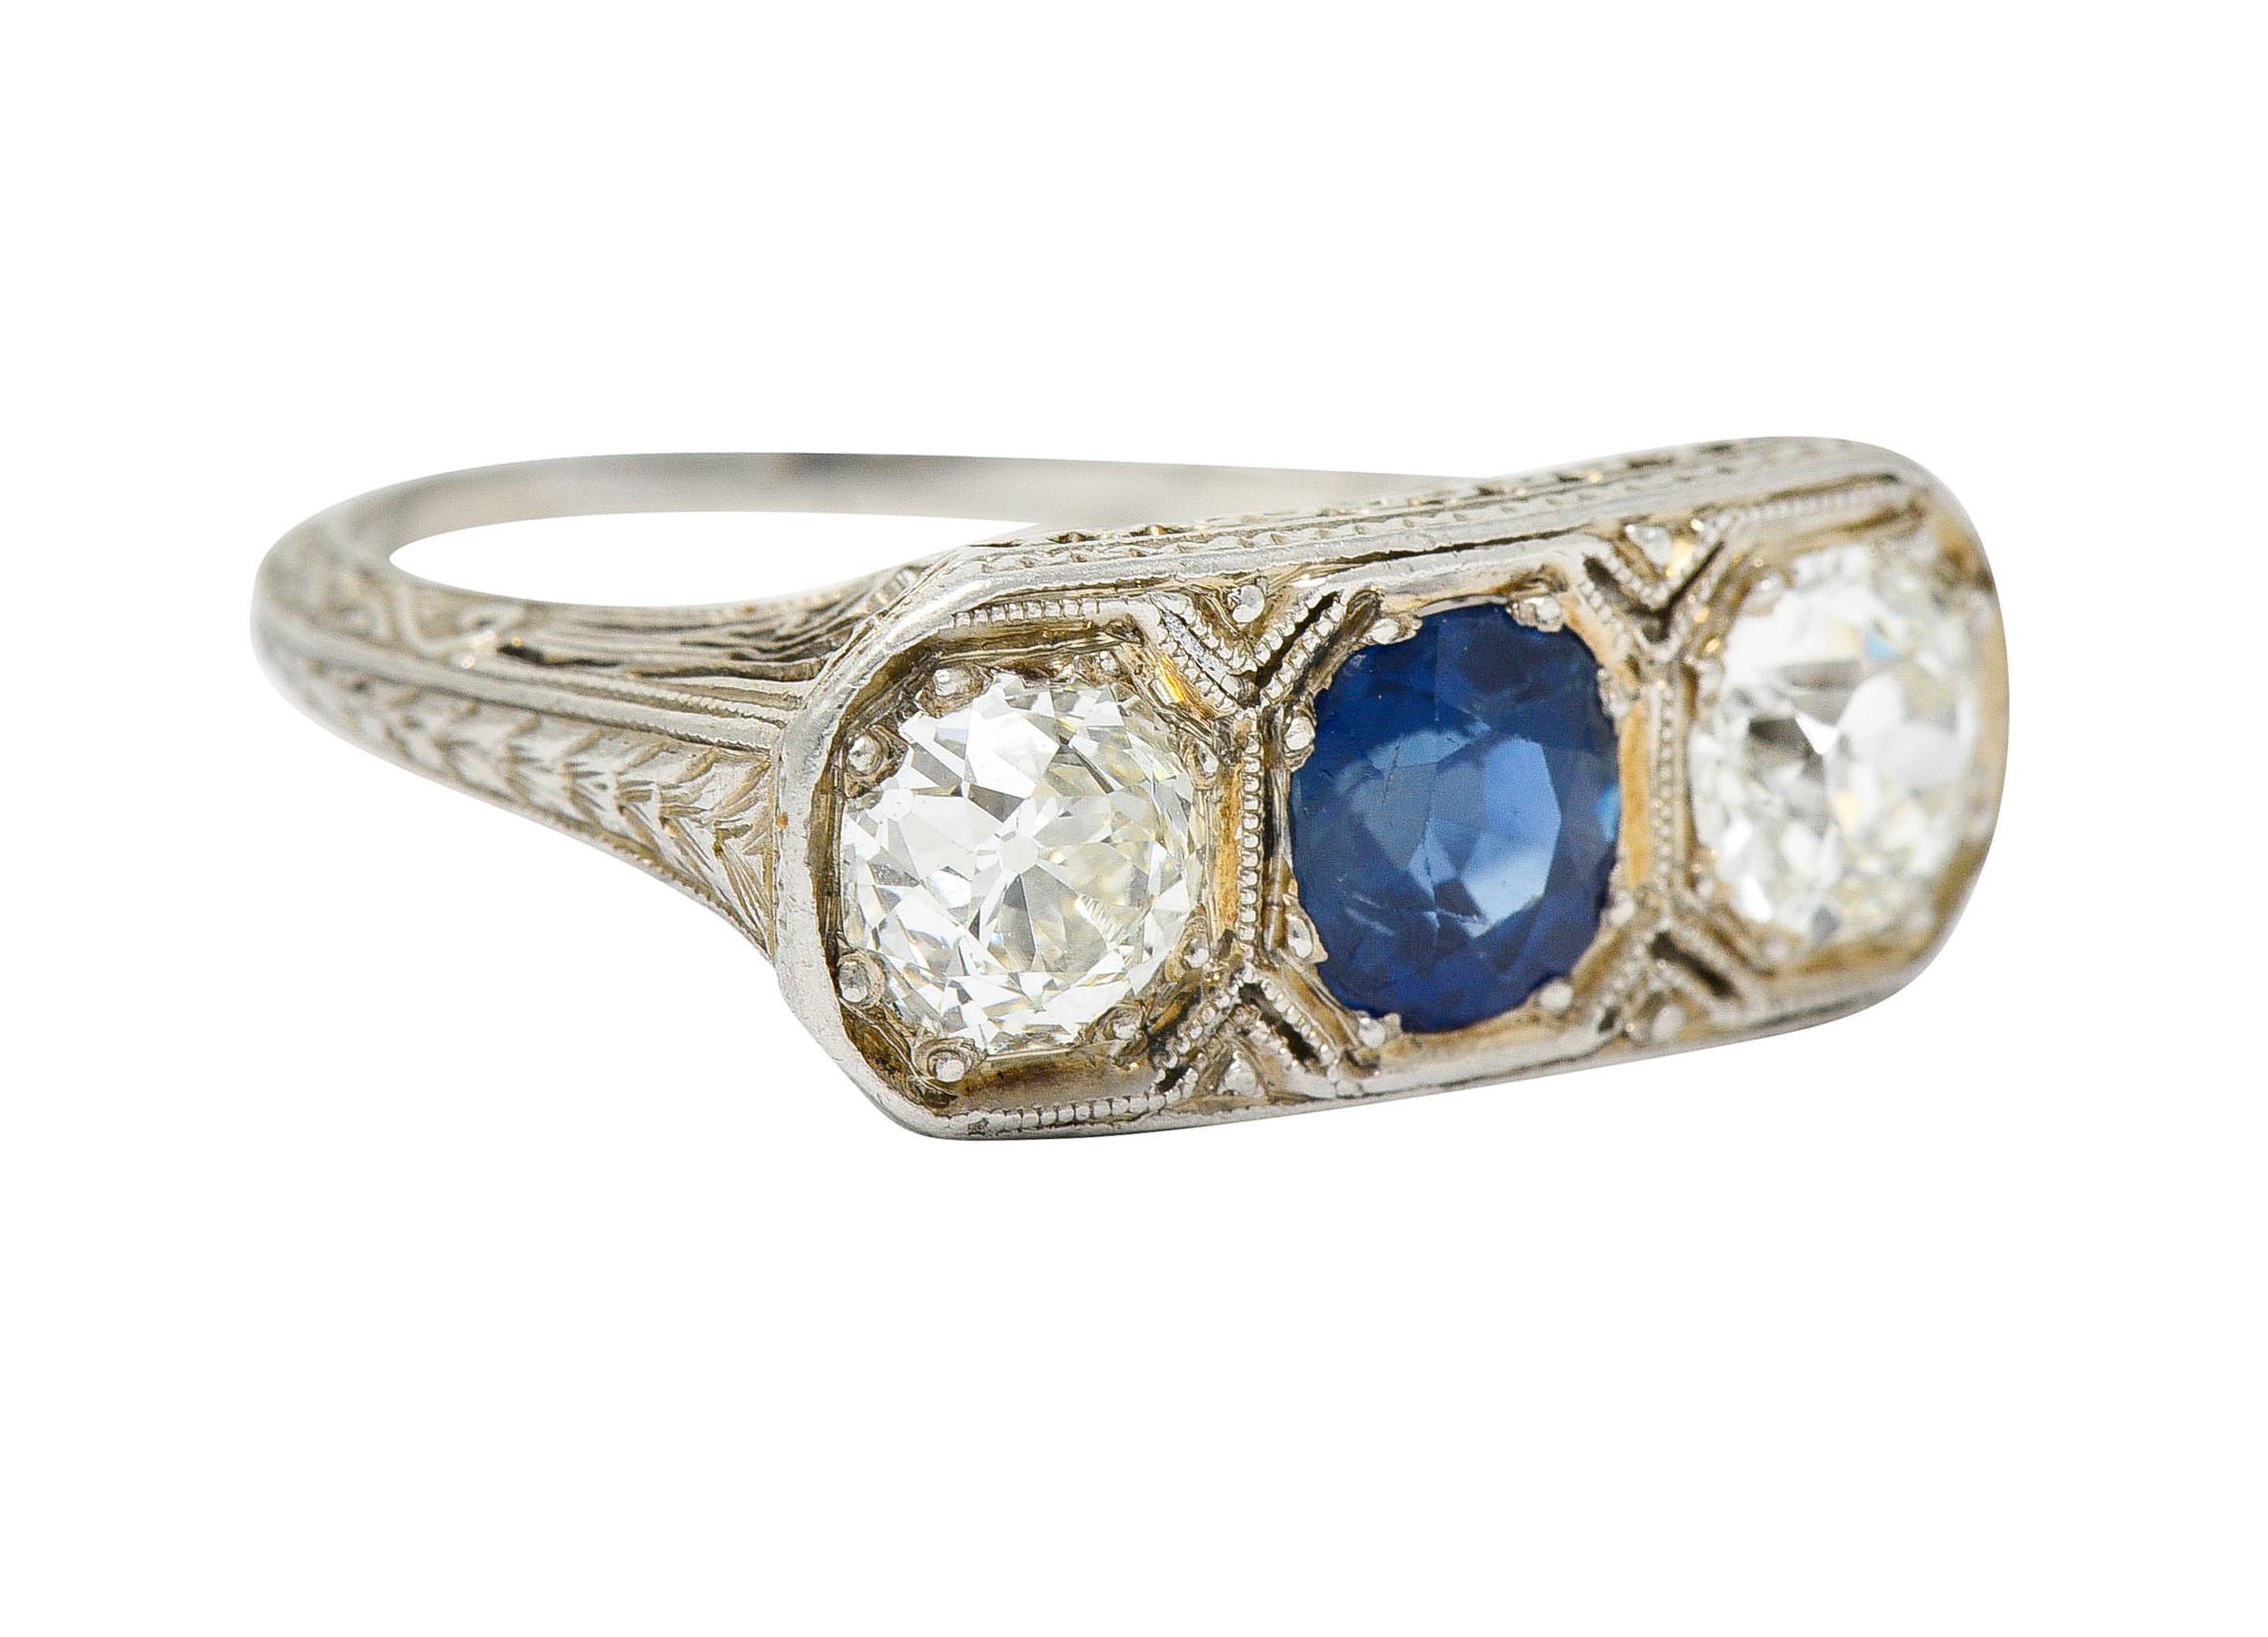 Centering an oval cut sapphire weighing approximately 1.15 carats

Bright royal blue in color with no indications of heat - Cambodian in origin

With two old European cut diamonds weighing approximately 1.15 carats - J/K color with VS clarity

Bead